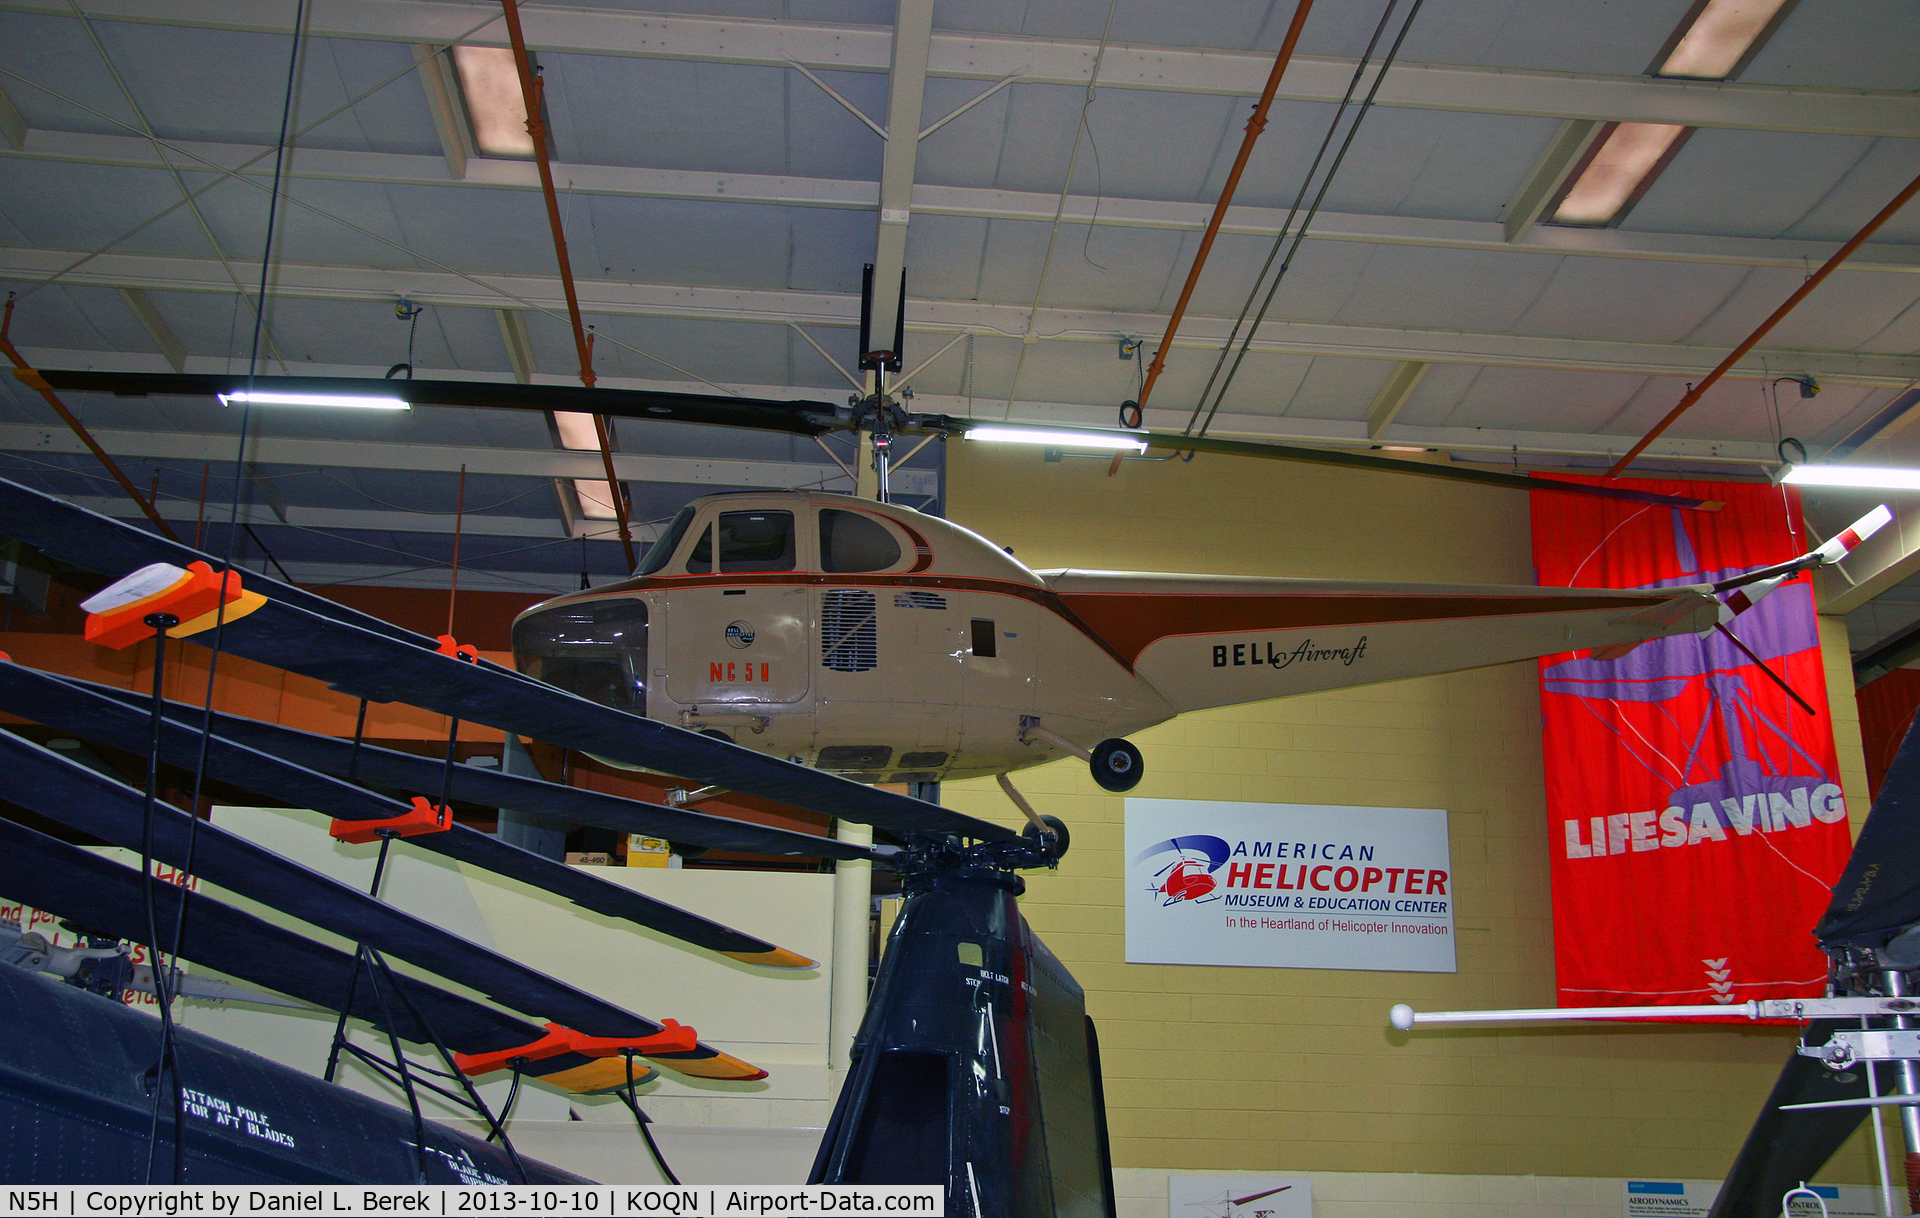 N5H, 1946 Bell 47B C/N 3, This beautiful early-production helicopter is on display at the American Helicopter Museum.